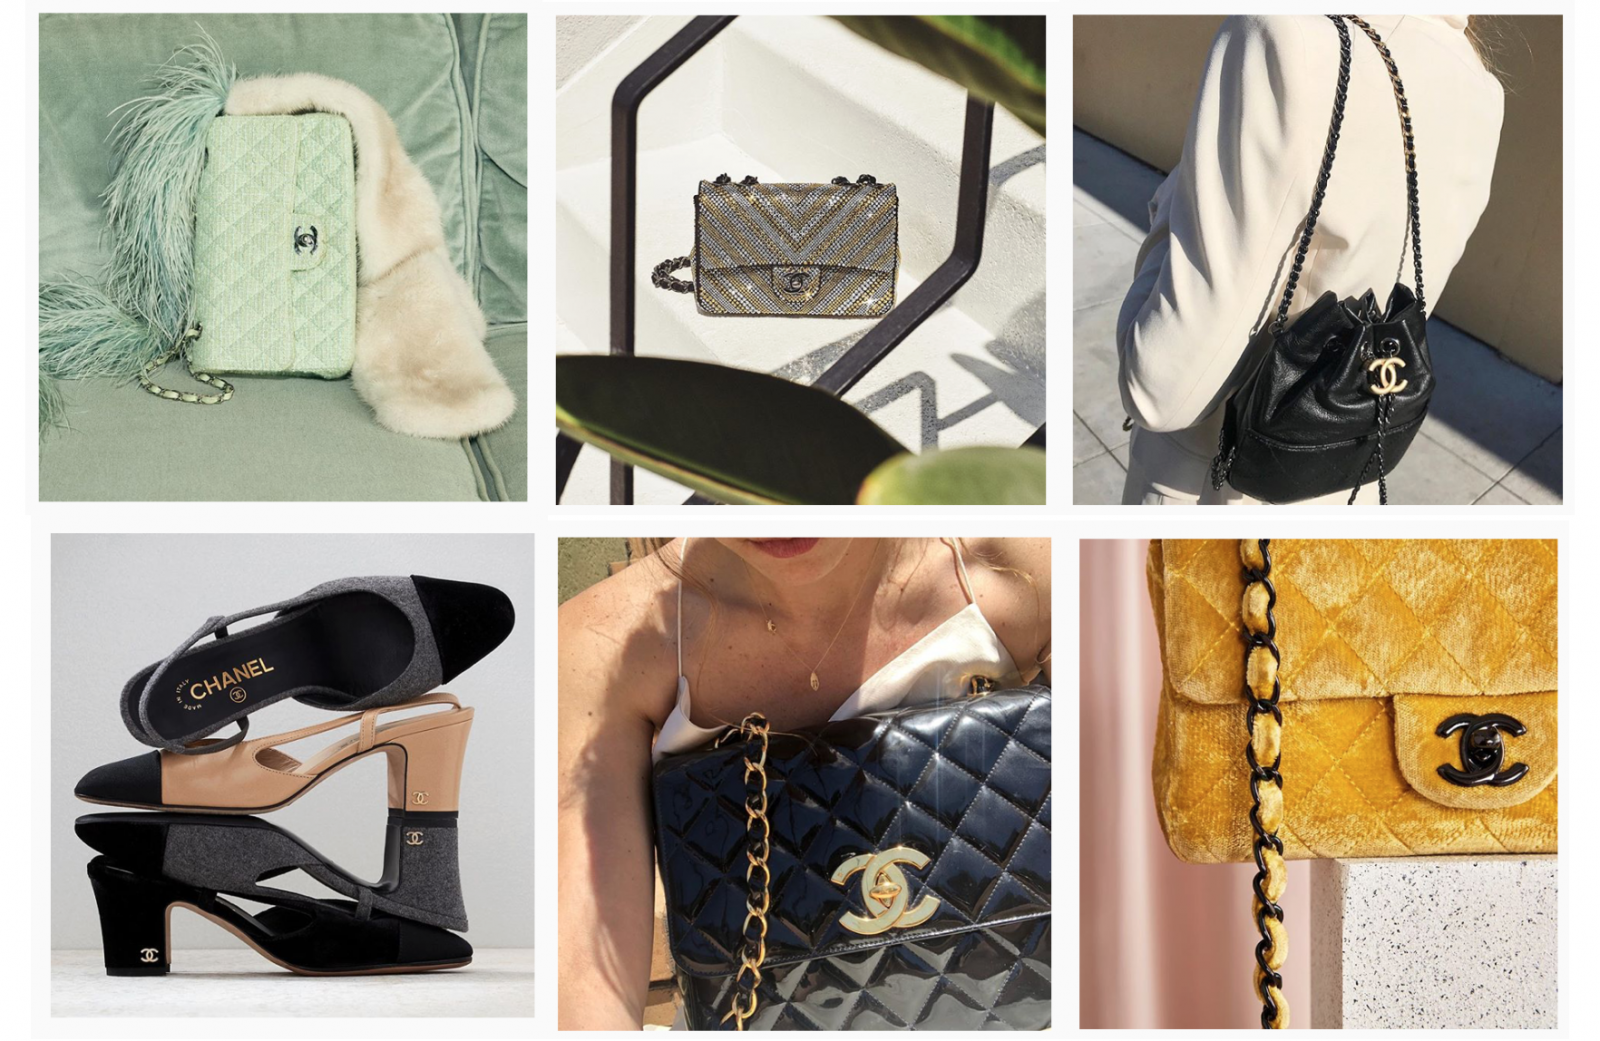 Why Did Chanel, LVMH, Burberry and Hermès Lose Their Brand